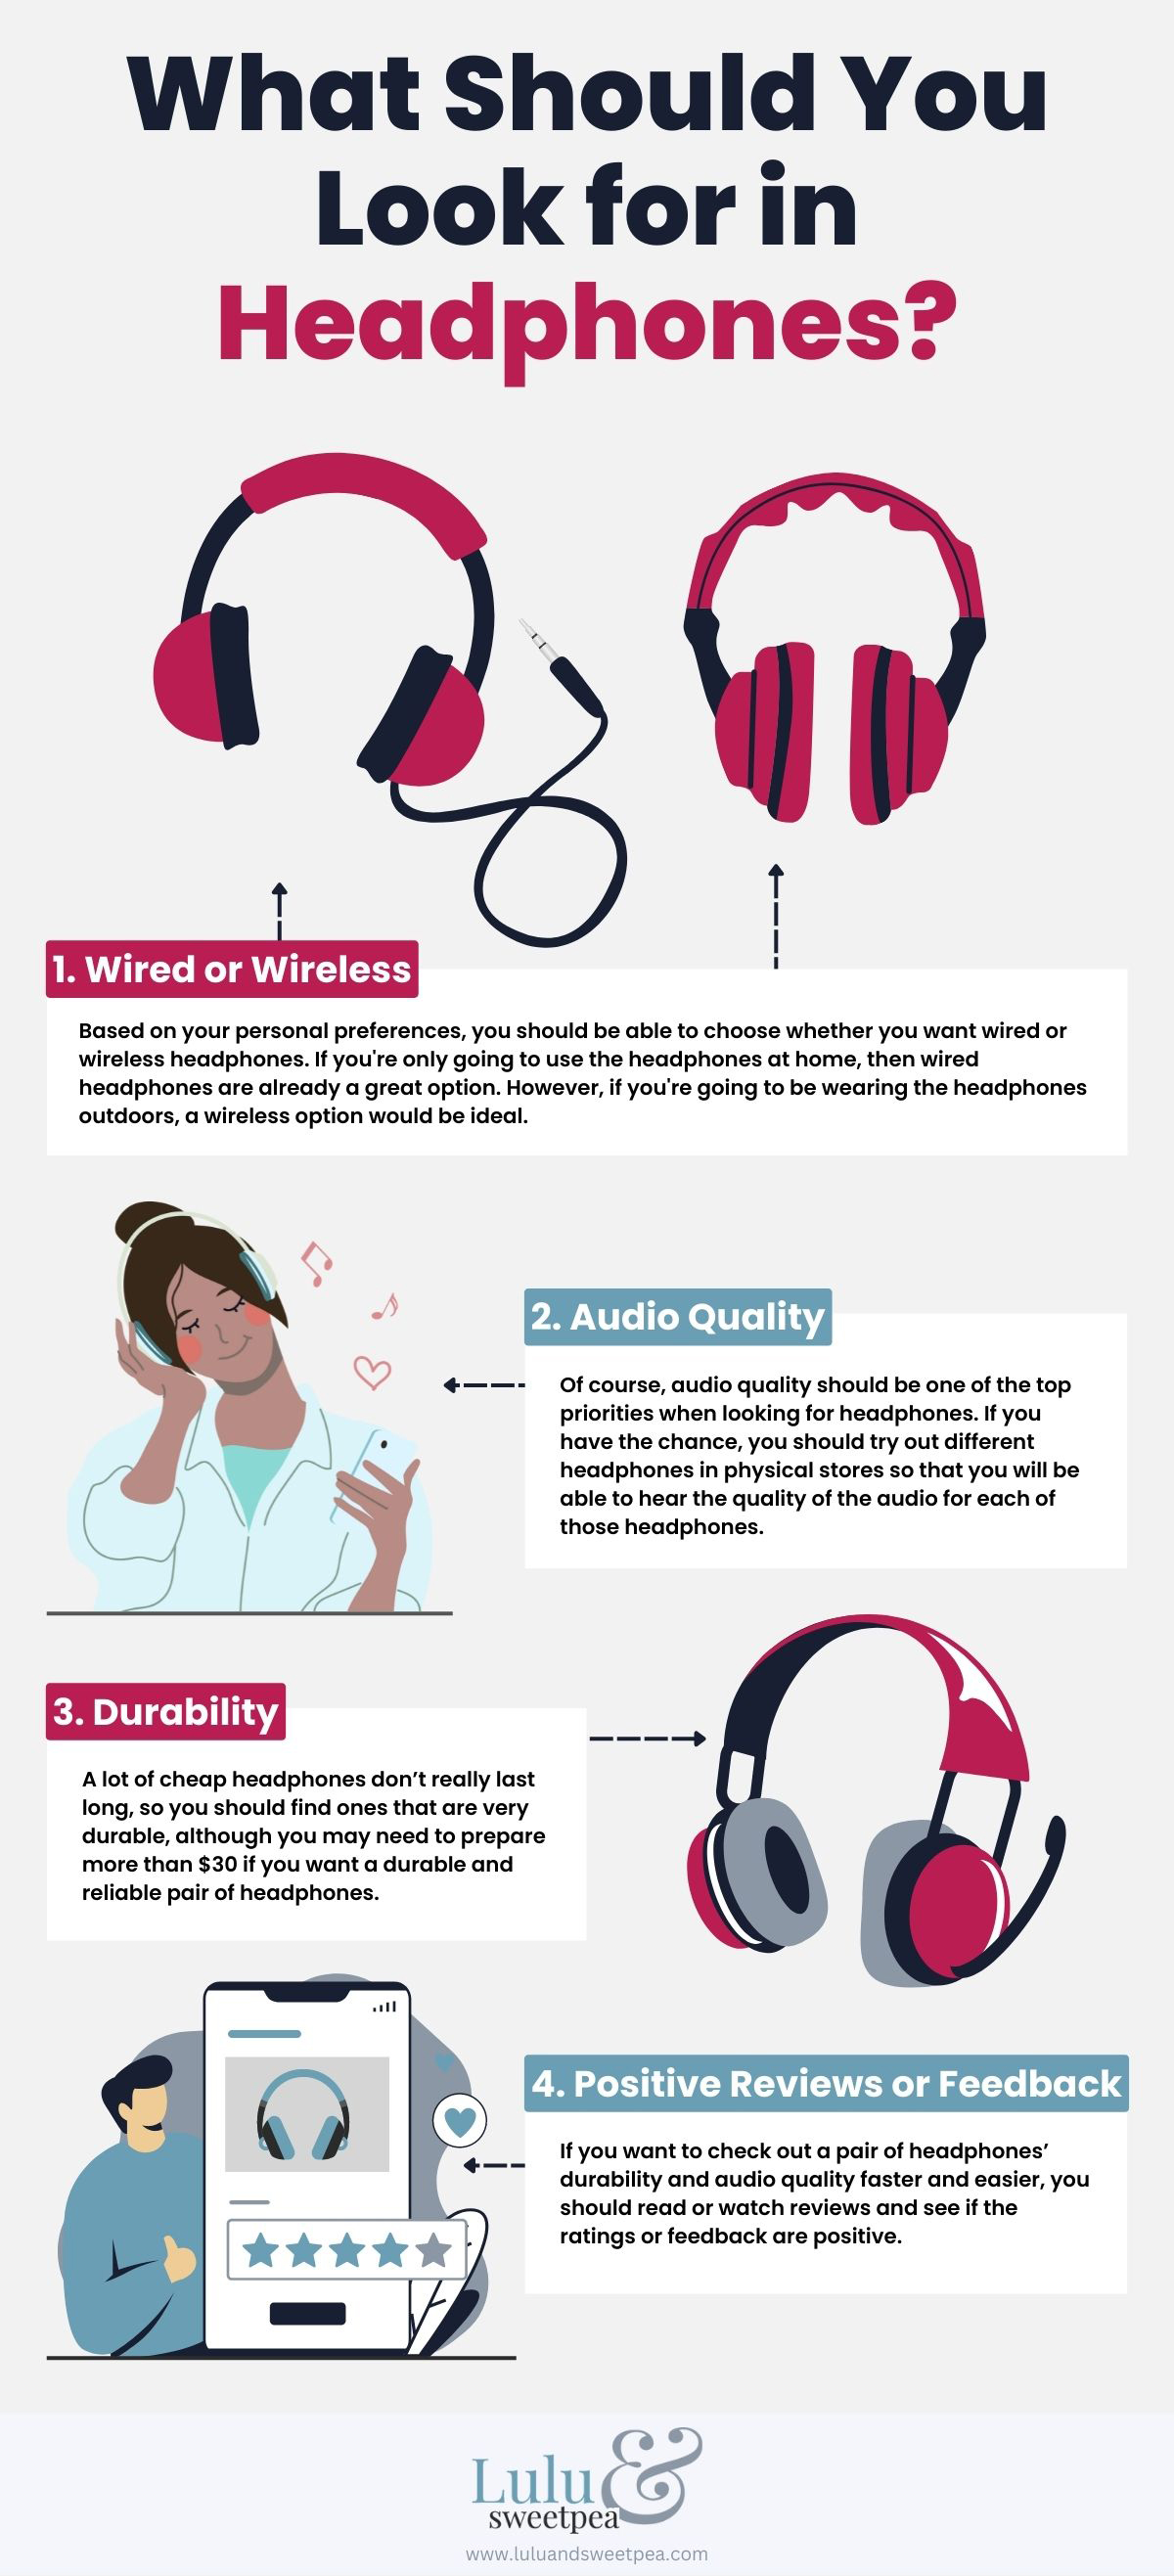 What Should You Look for in Headphones